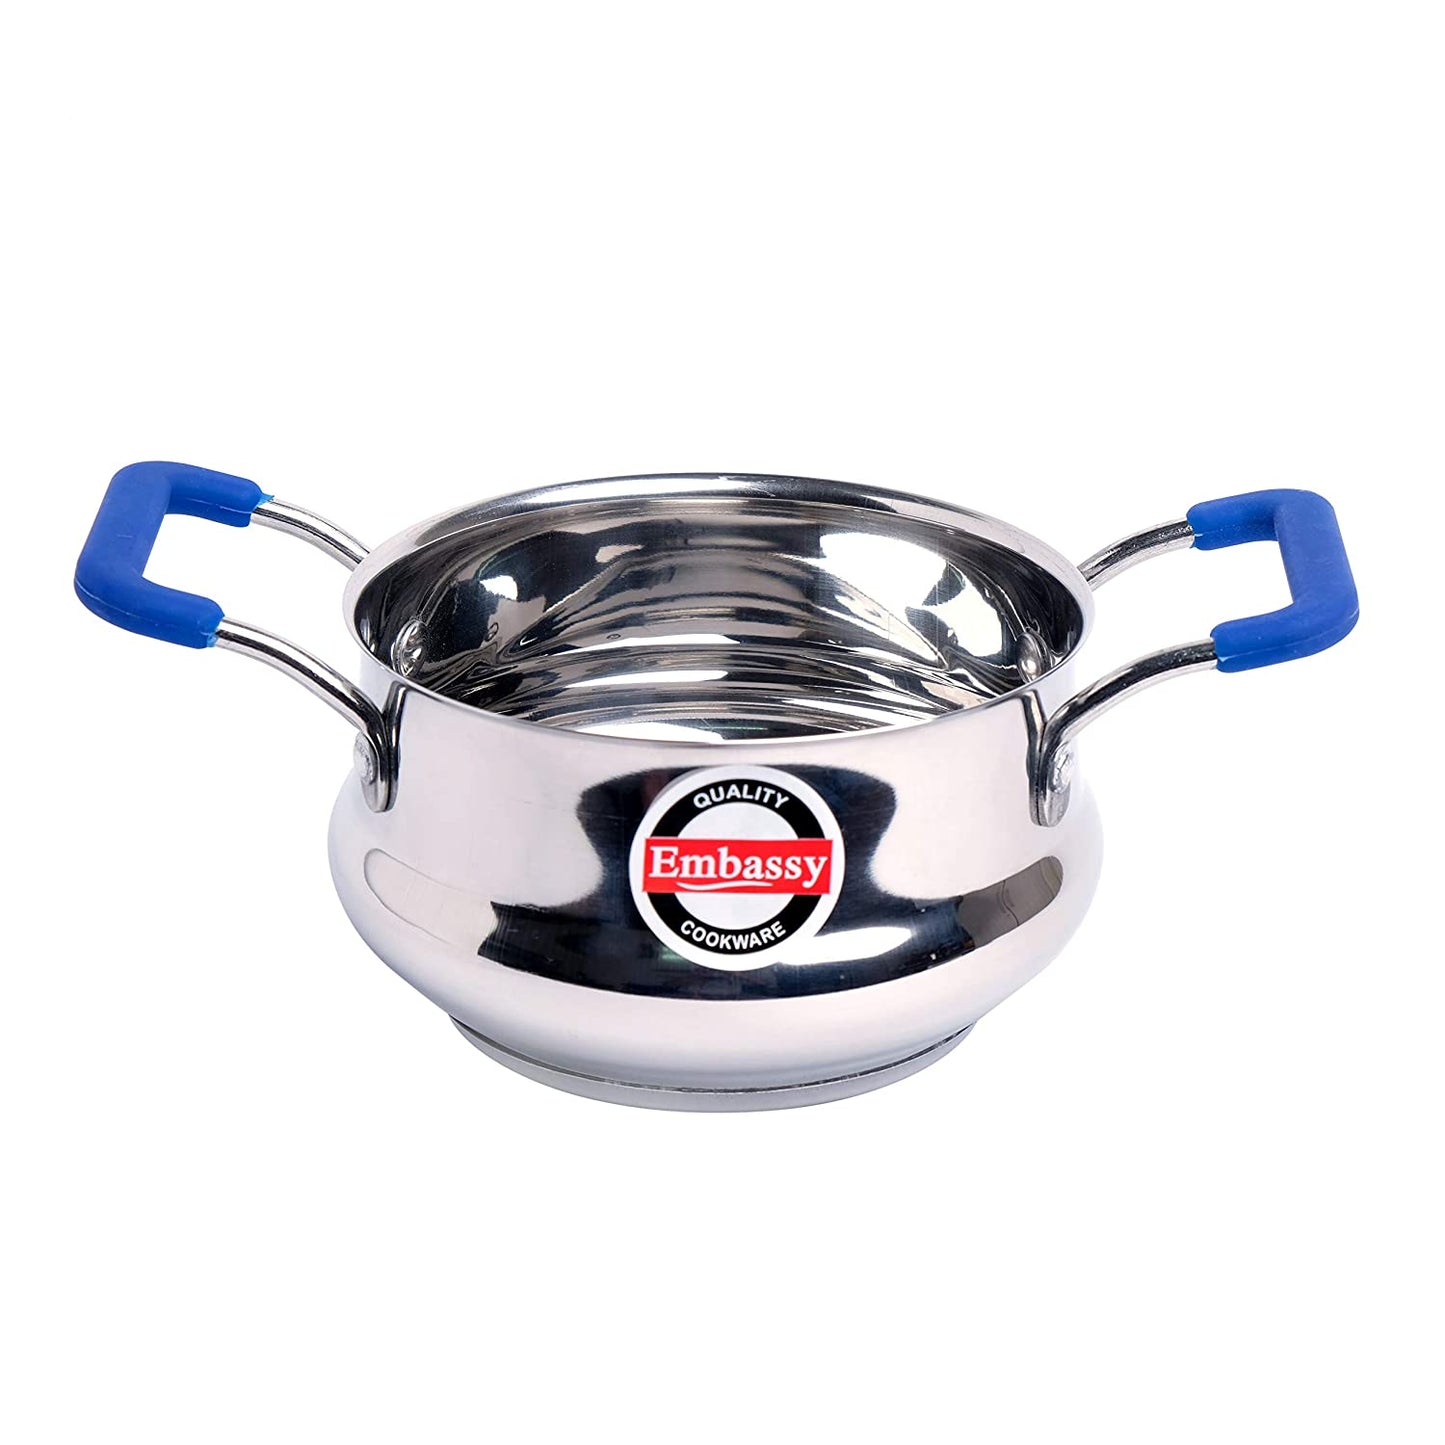 Embassy Stainless Steel Zircon Dish/Cook and Serve Pot/Handi with Glass Lid, Size 1, 1 Litre, 14.5 cms (Sandwich Bottom, Induction Friendly)